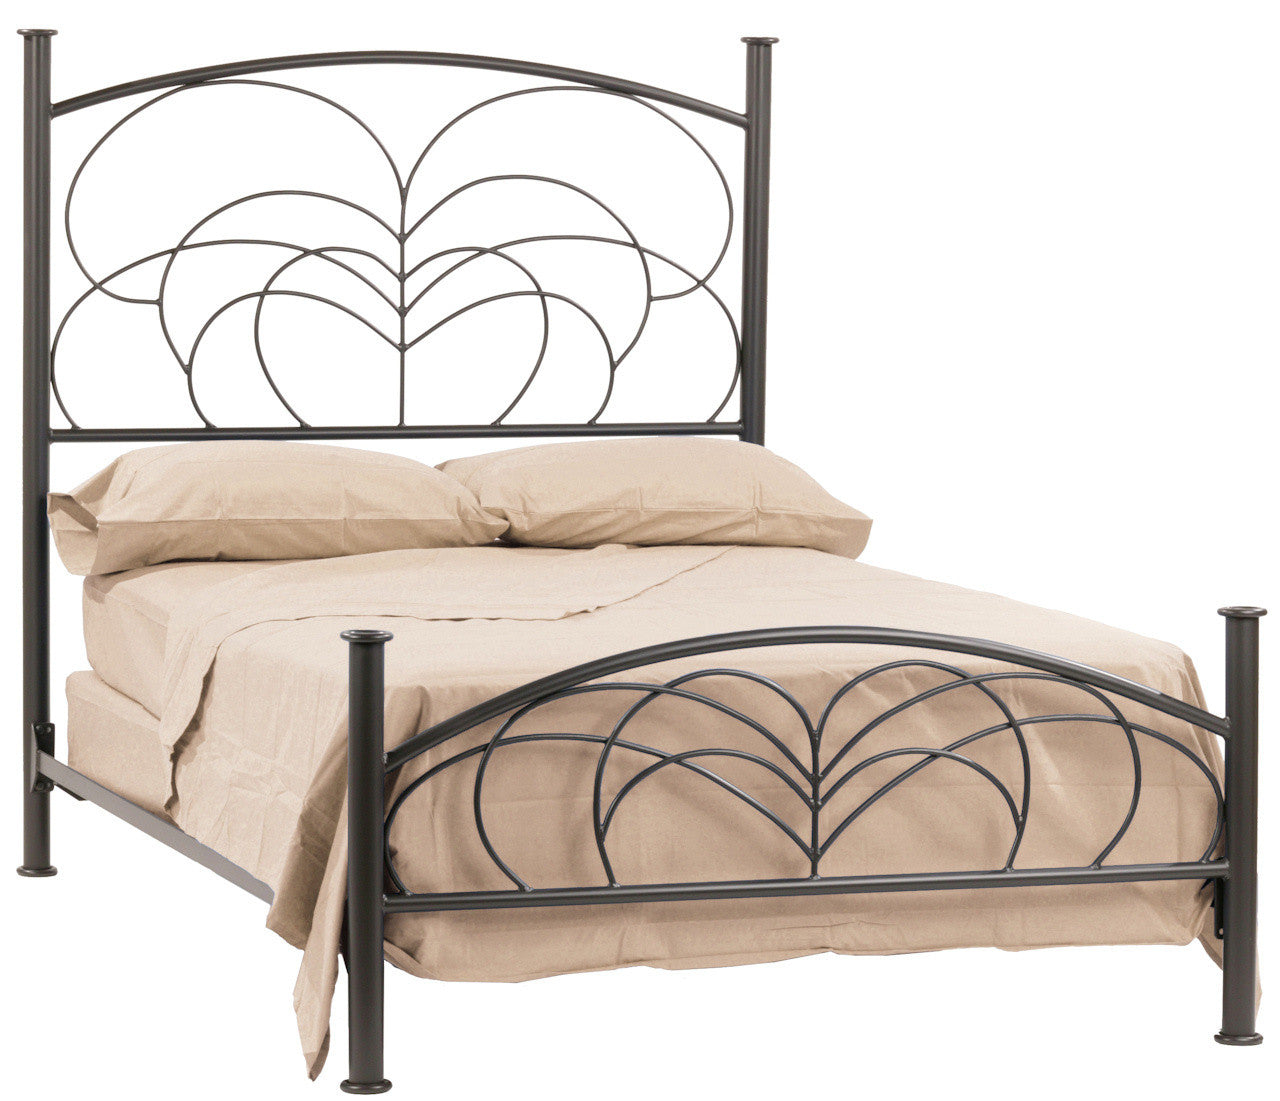 Stone County Ironworks 902-070 Willow Twin Bed